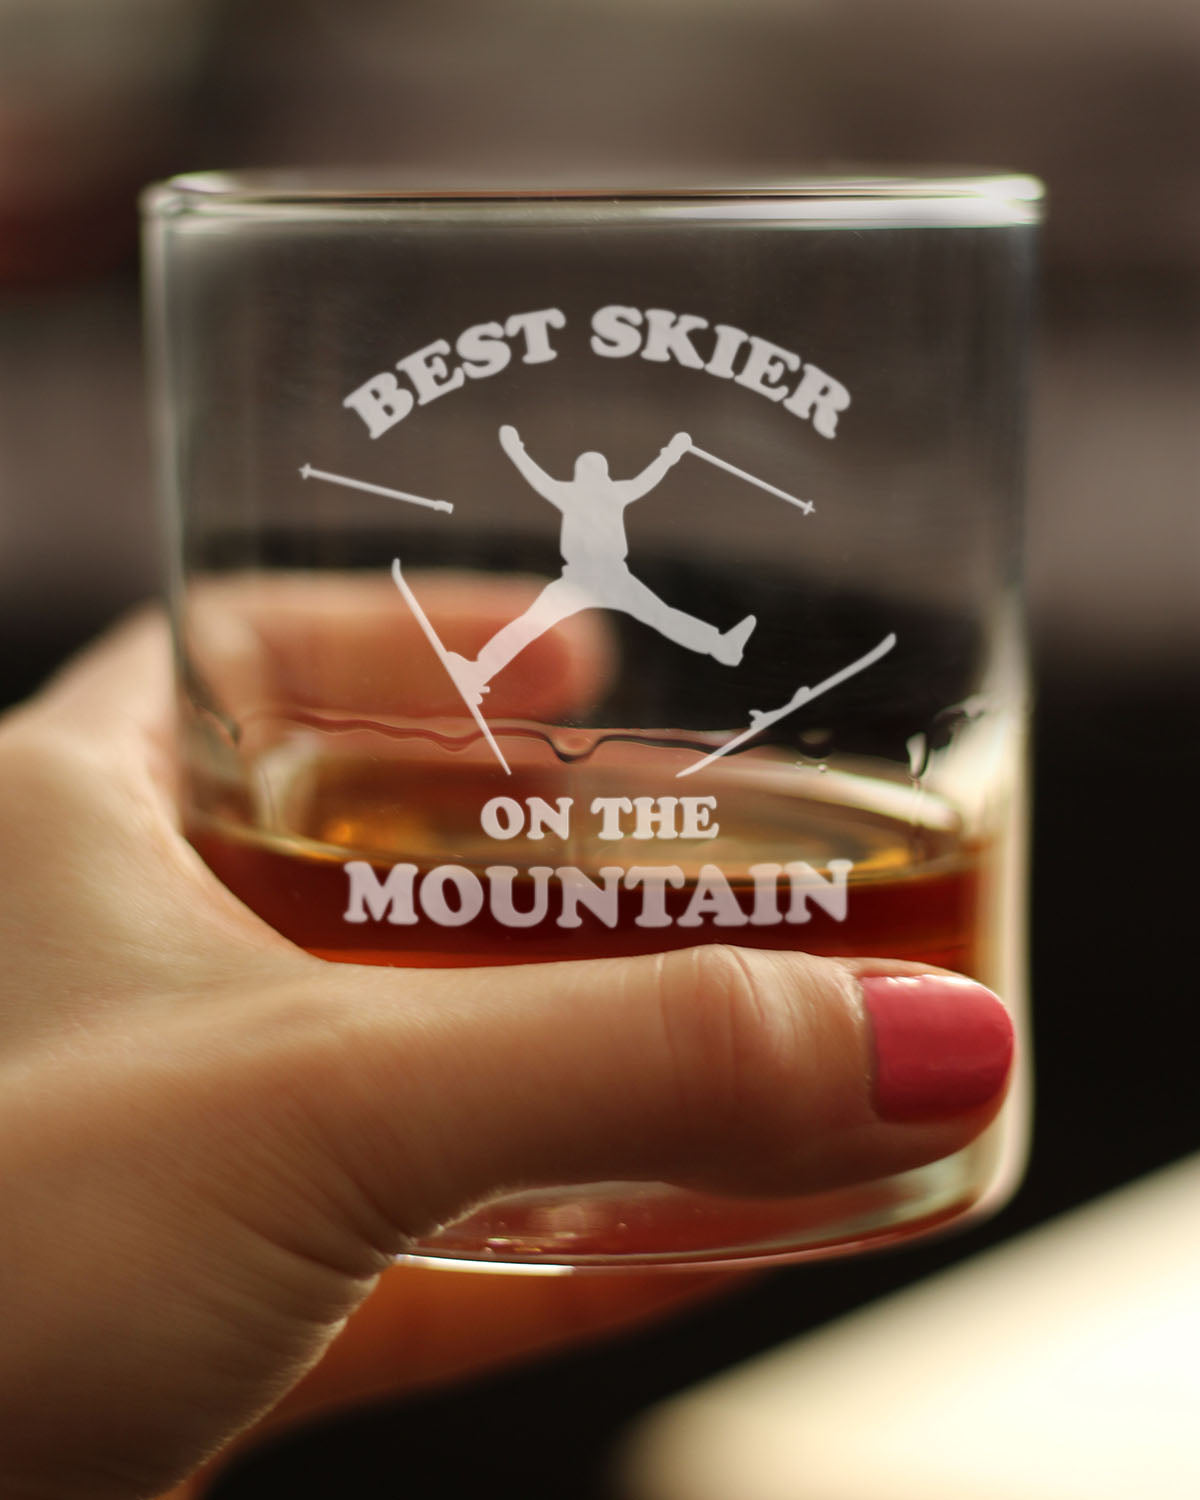 Best Skier - Whiskey Rocks Glass - Unique Skiing Themed Decor and Gifts for Mountain Lovers - 10.25 Oz Glasses